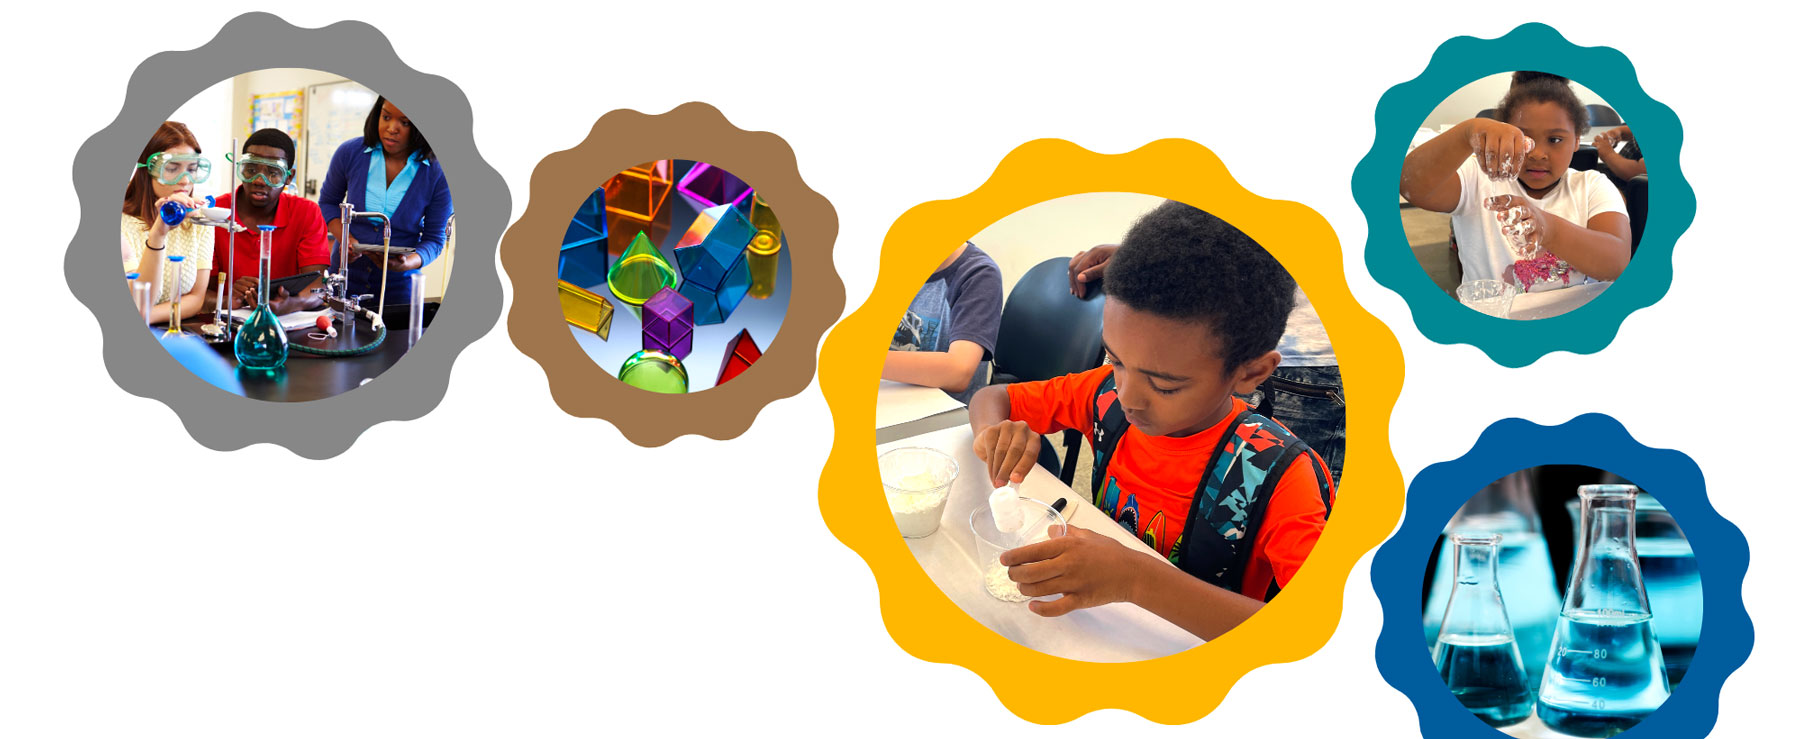 Multi-colored gears with images of children participating in science projects